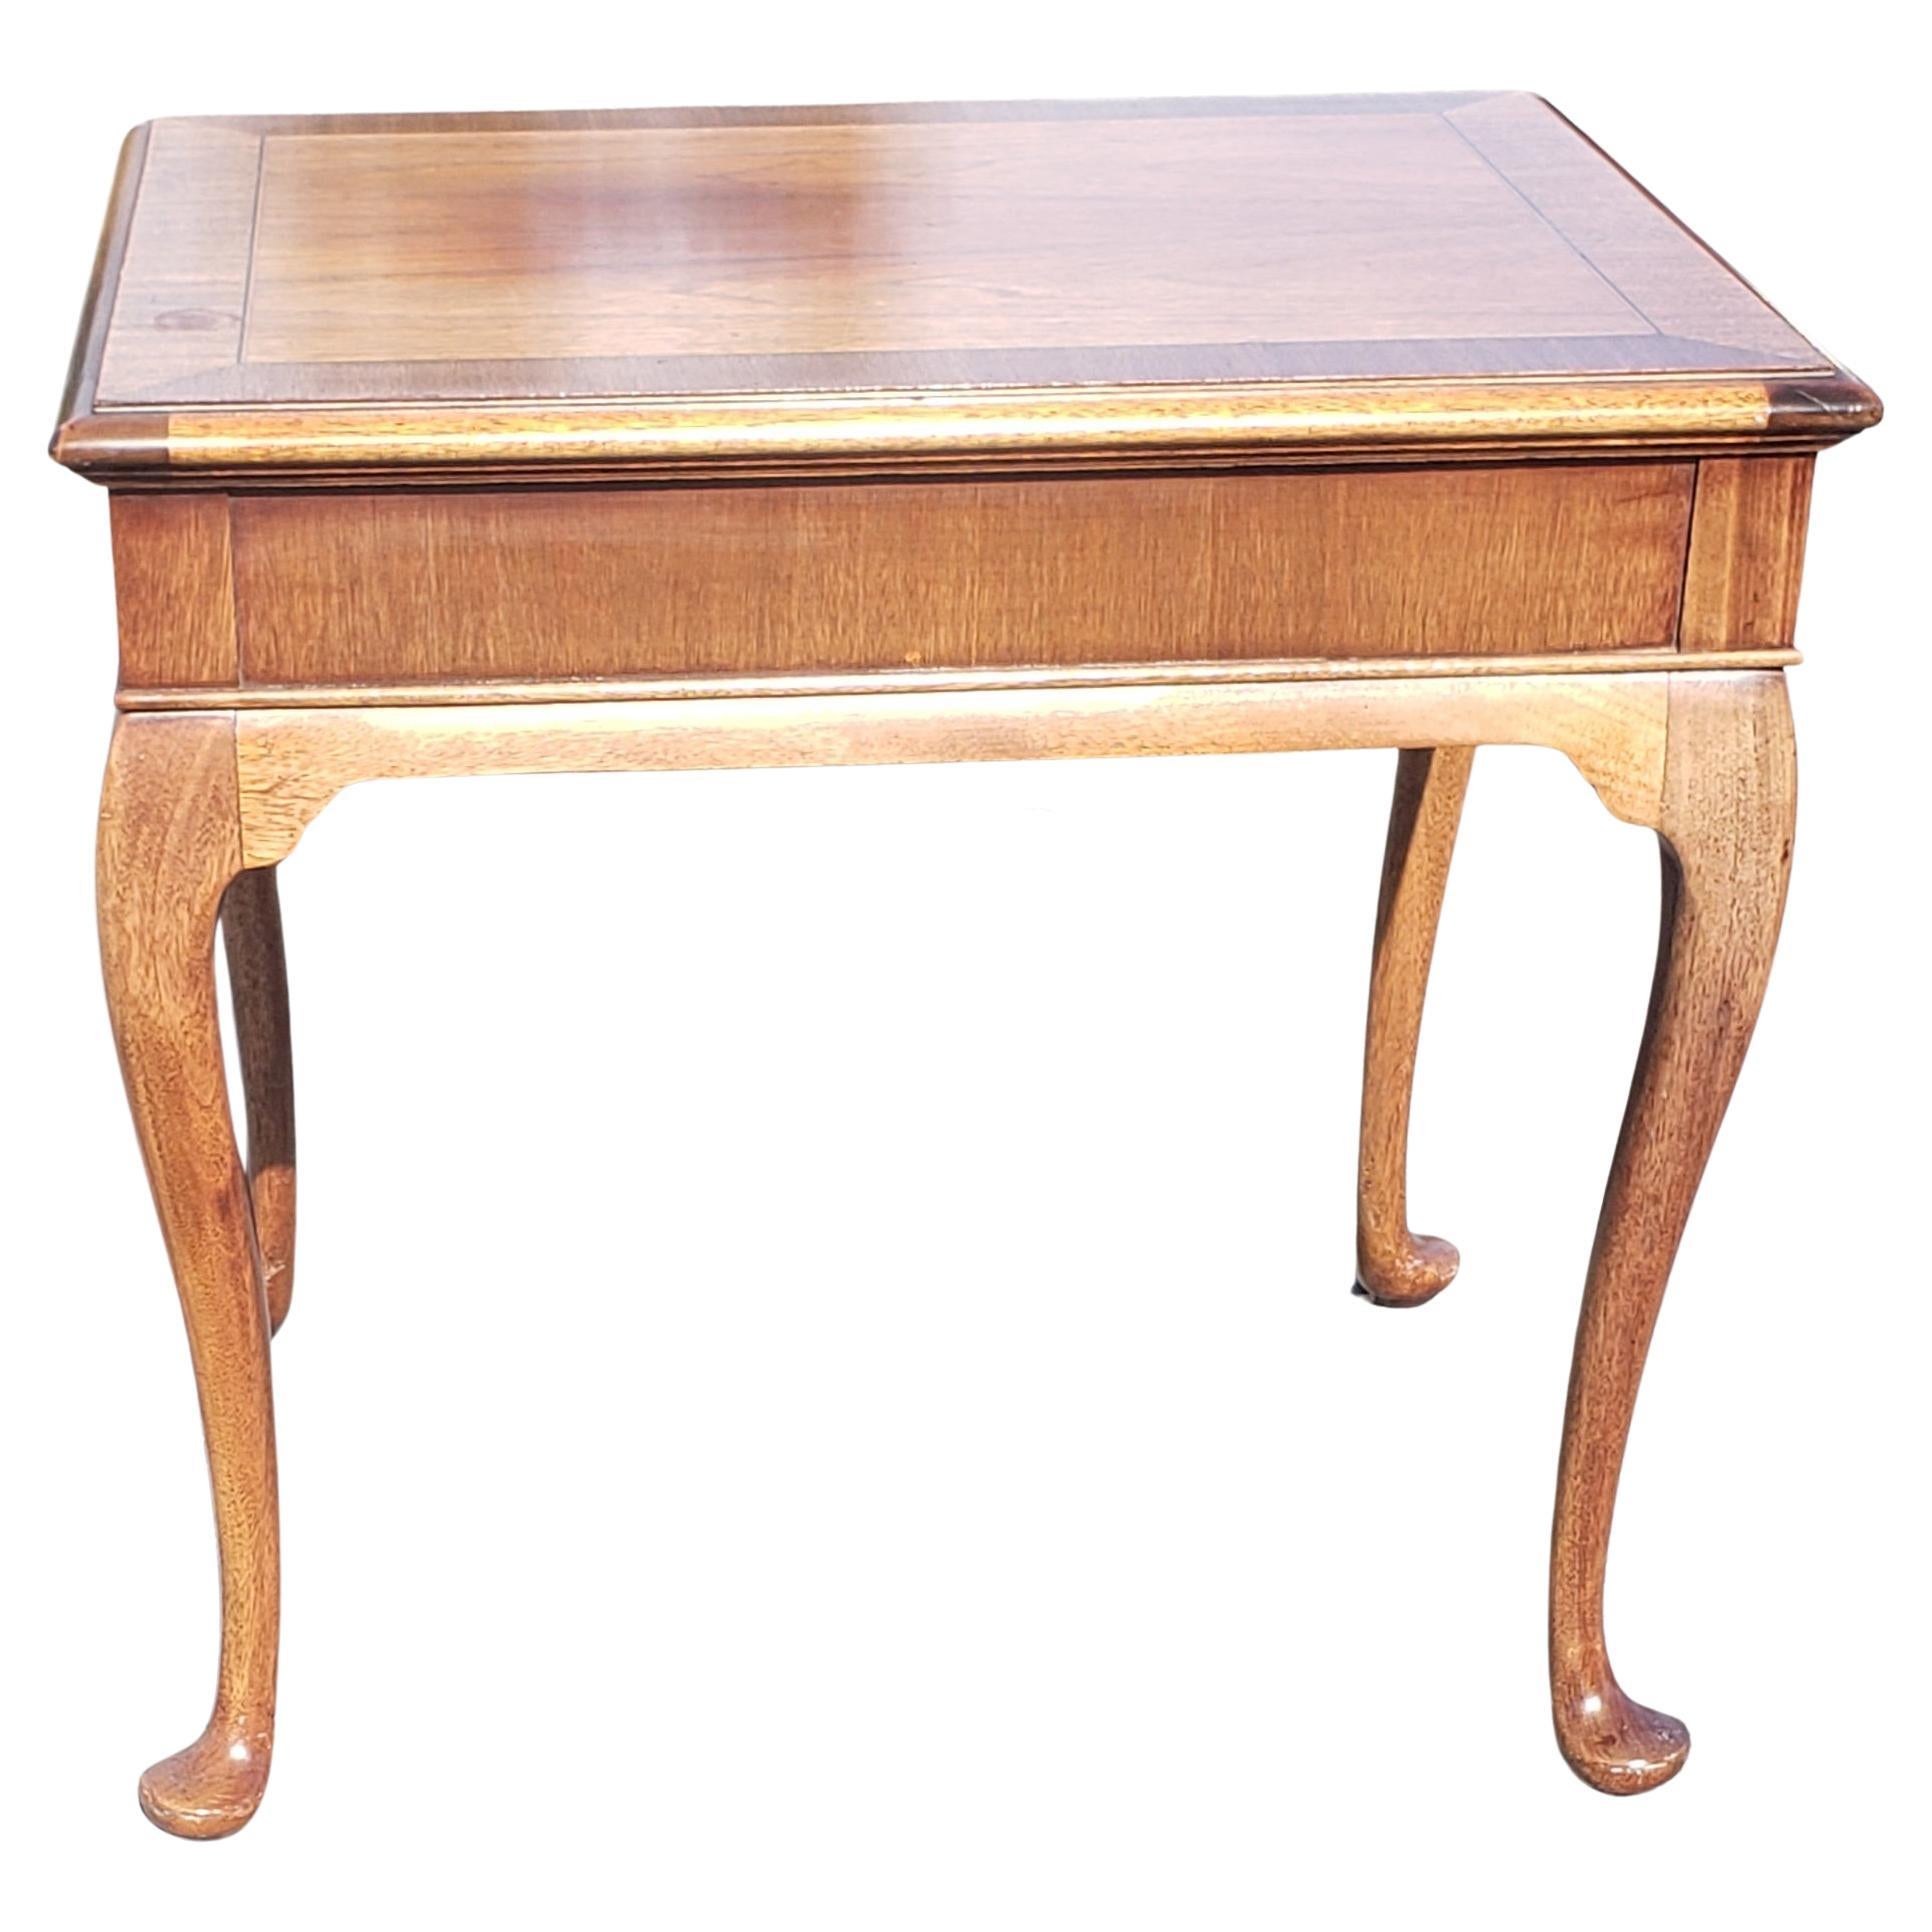 20th Century Hickory Chair Chippendale Mahogany Banded Top Side Table with Queen Ann Legs For Sale